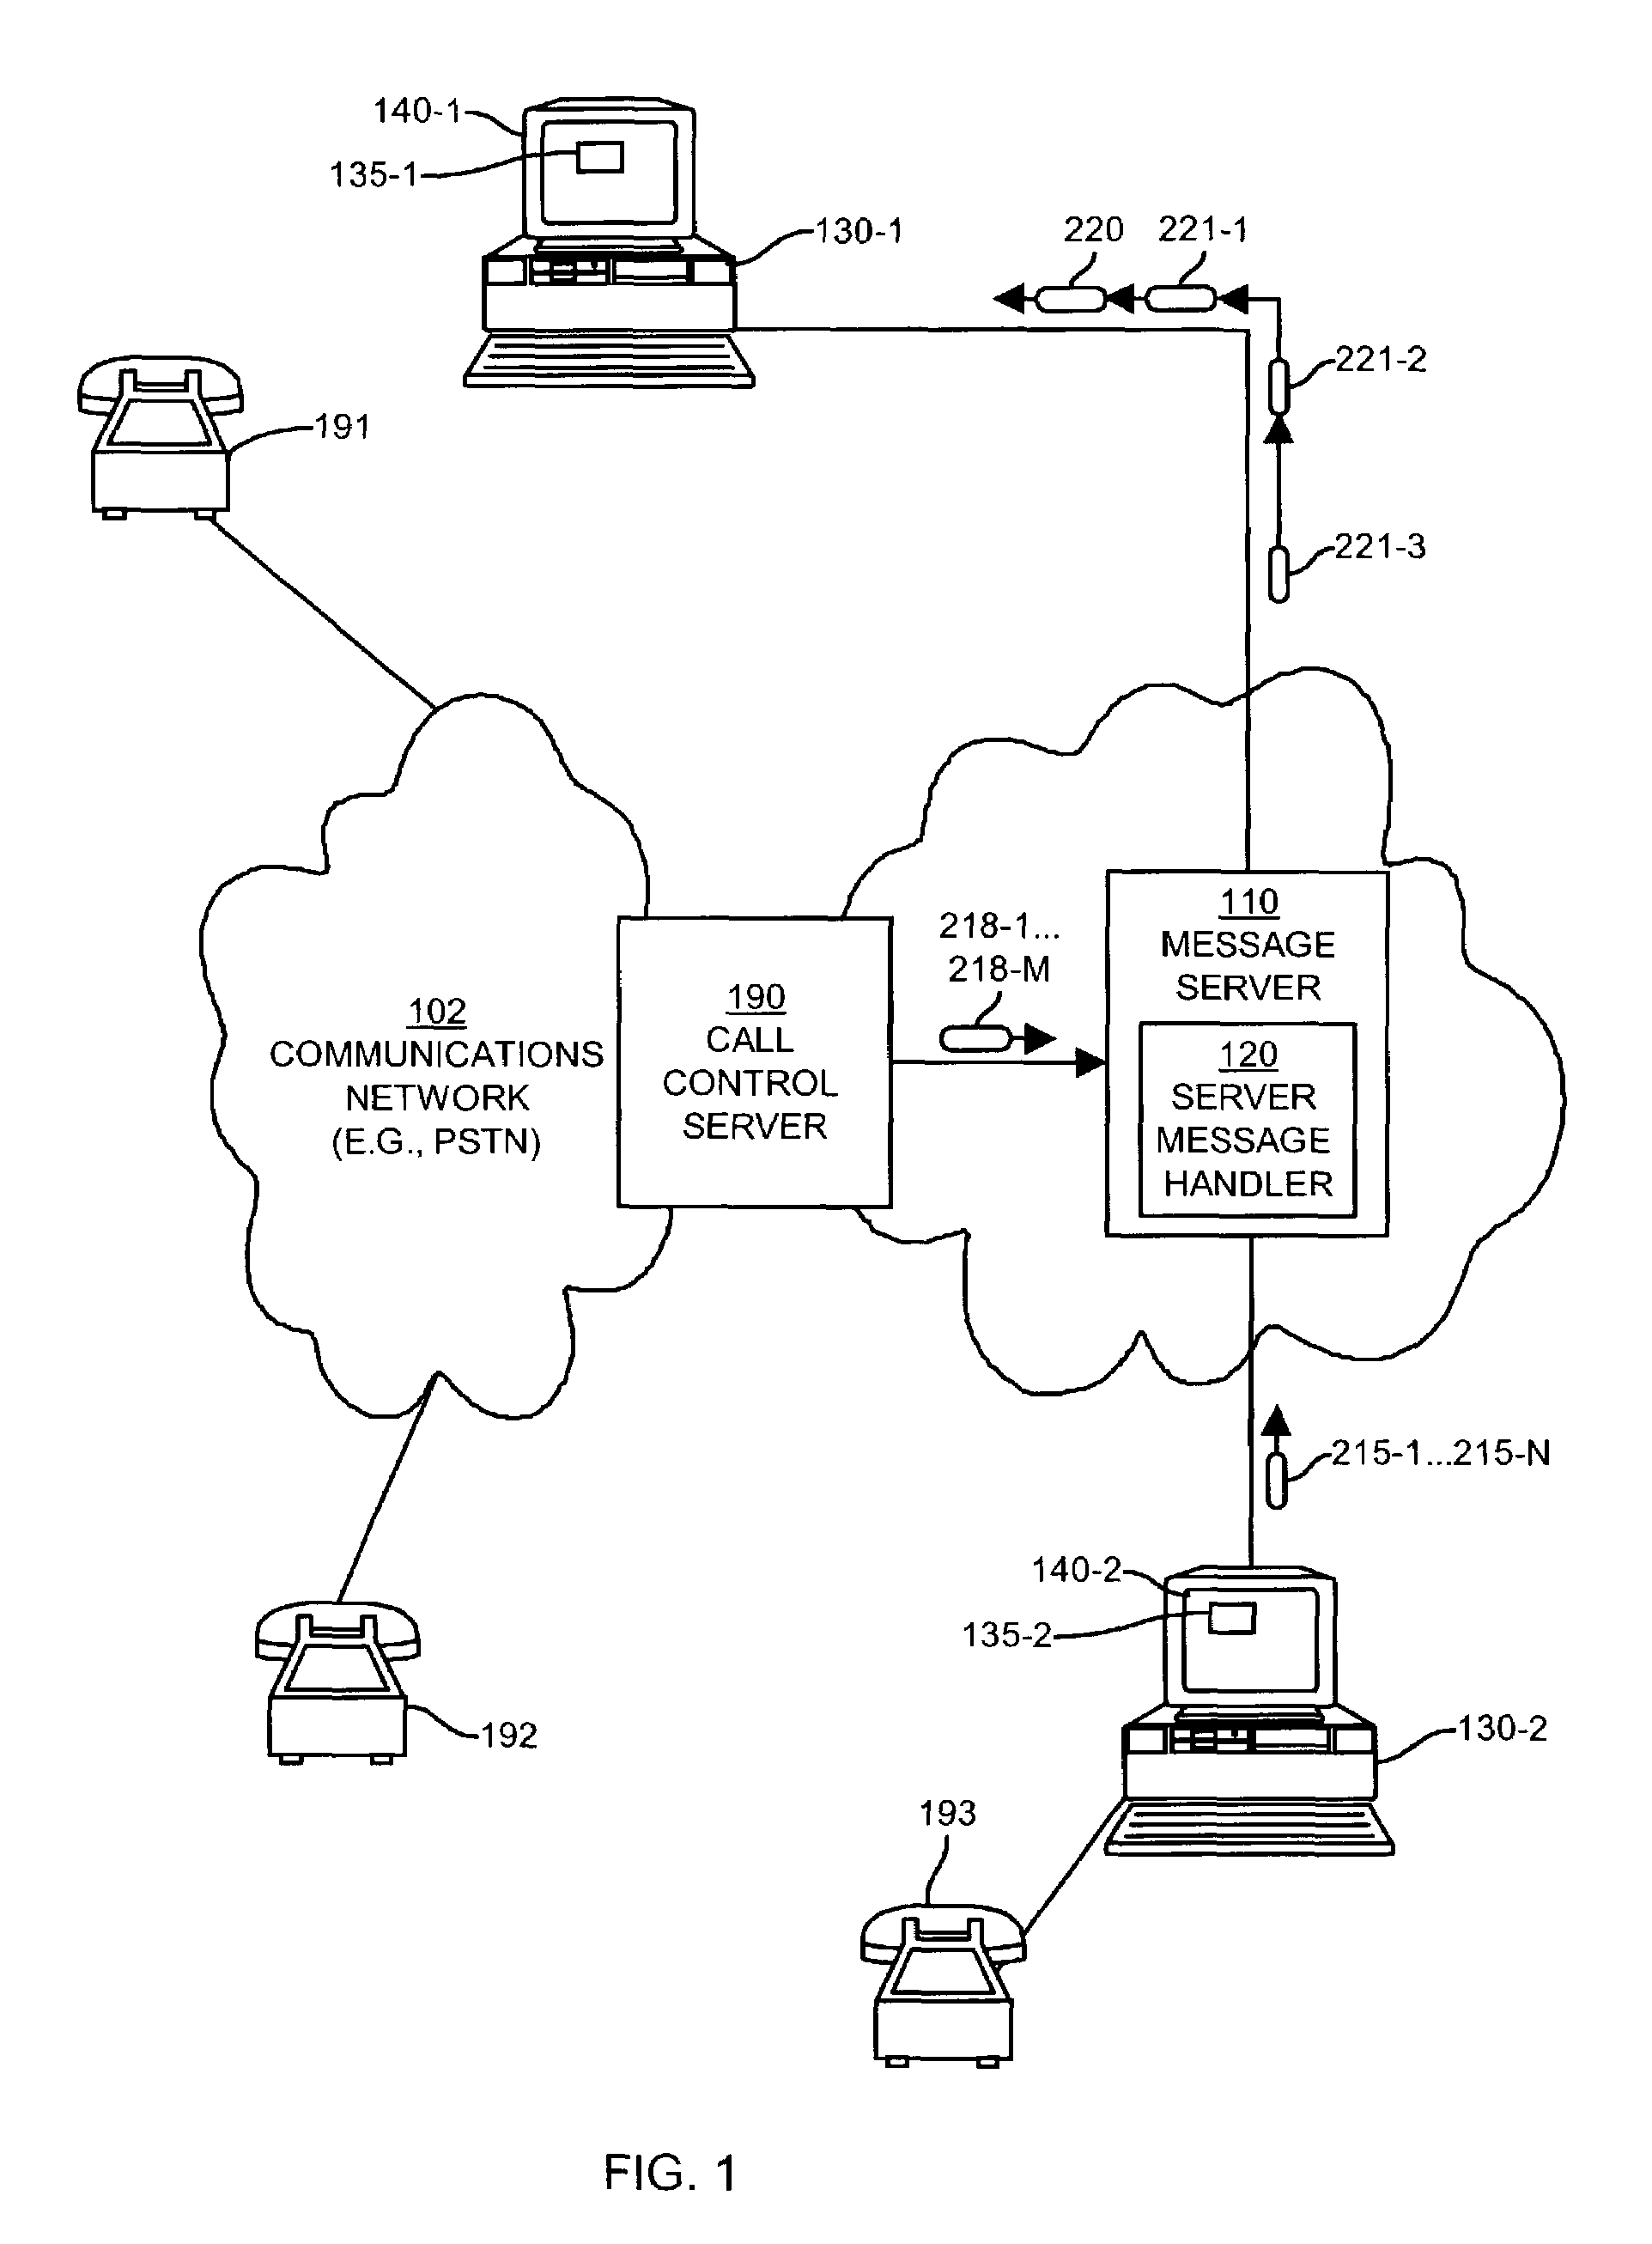 Methods and apparatus providing a web based messaging system